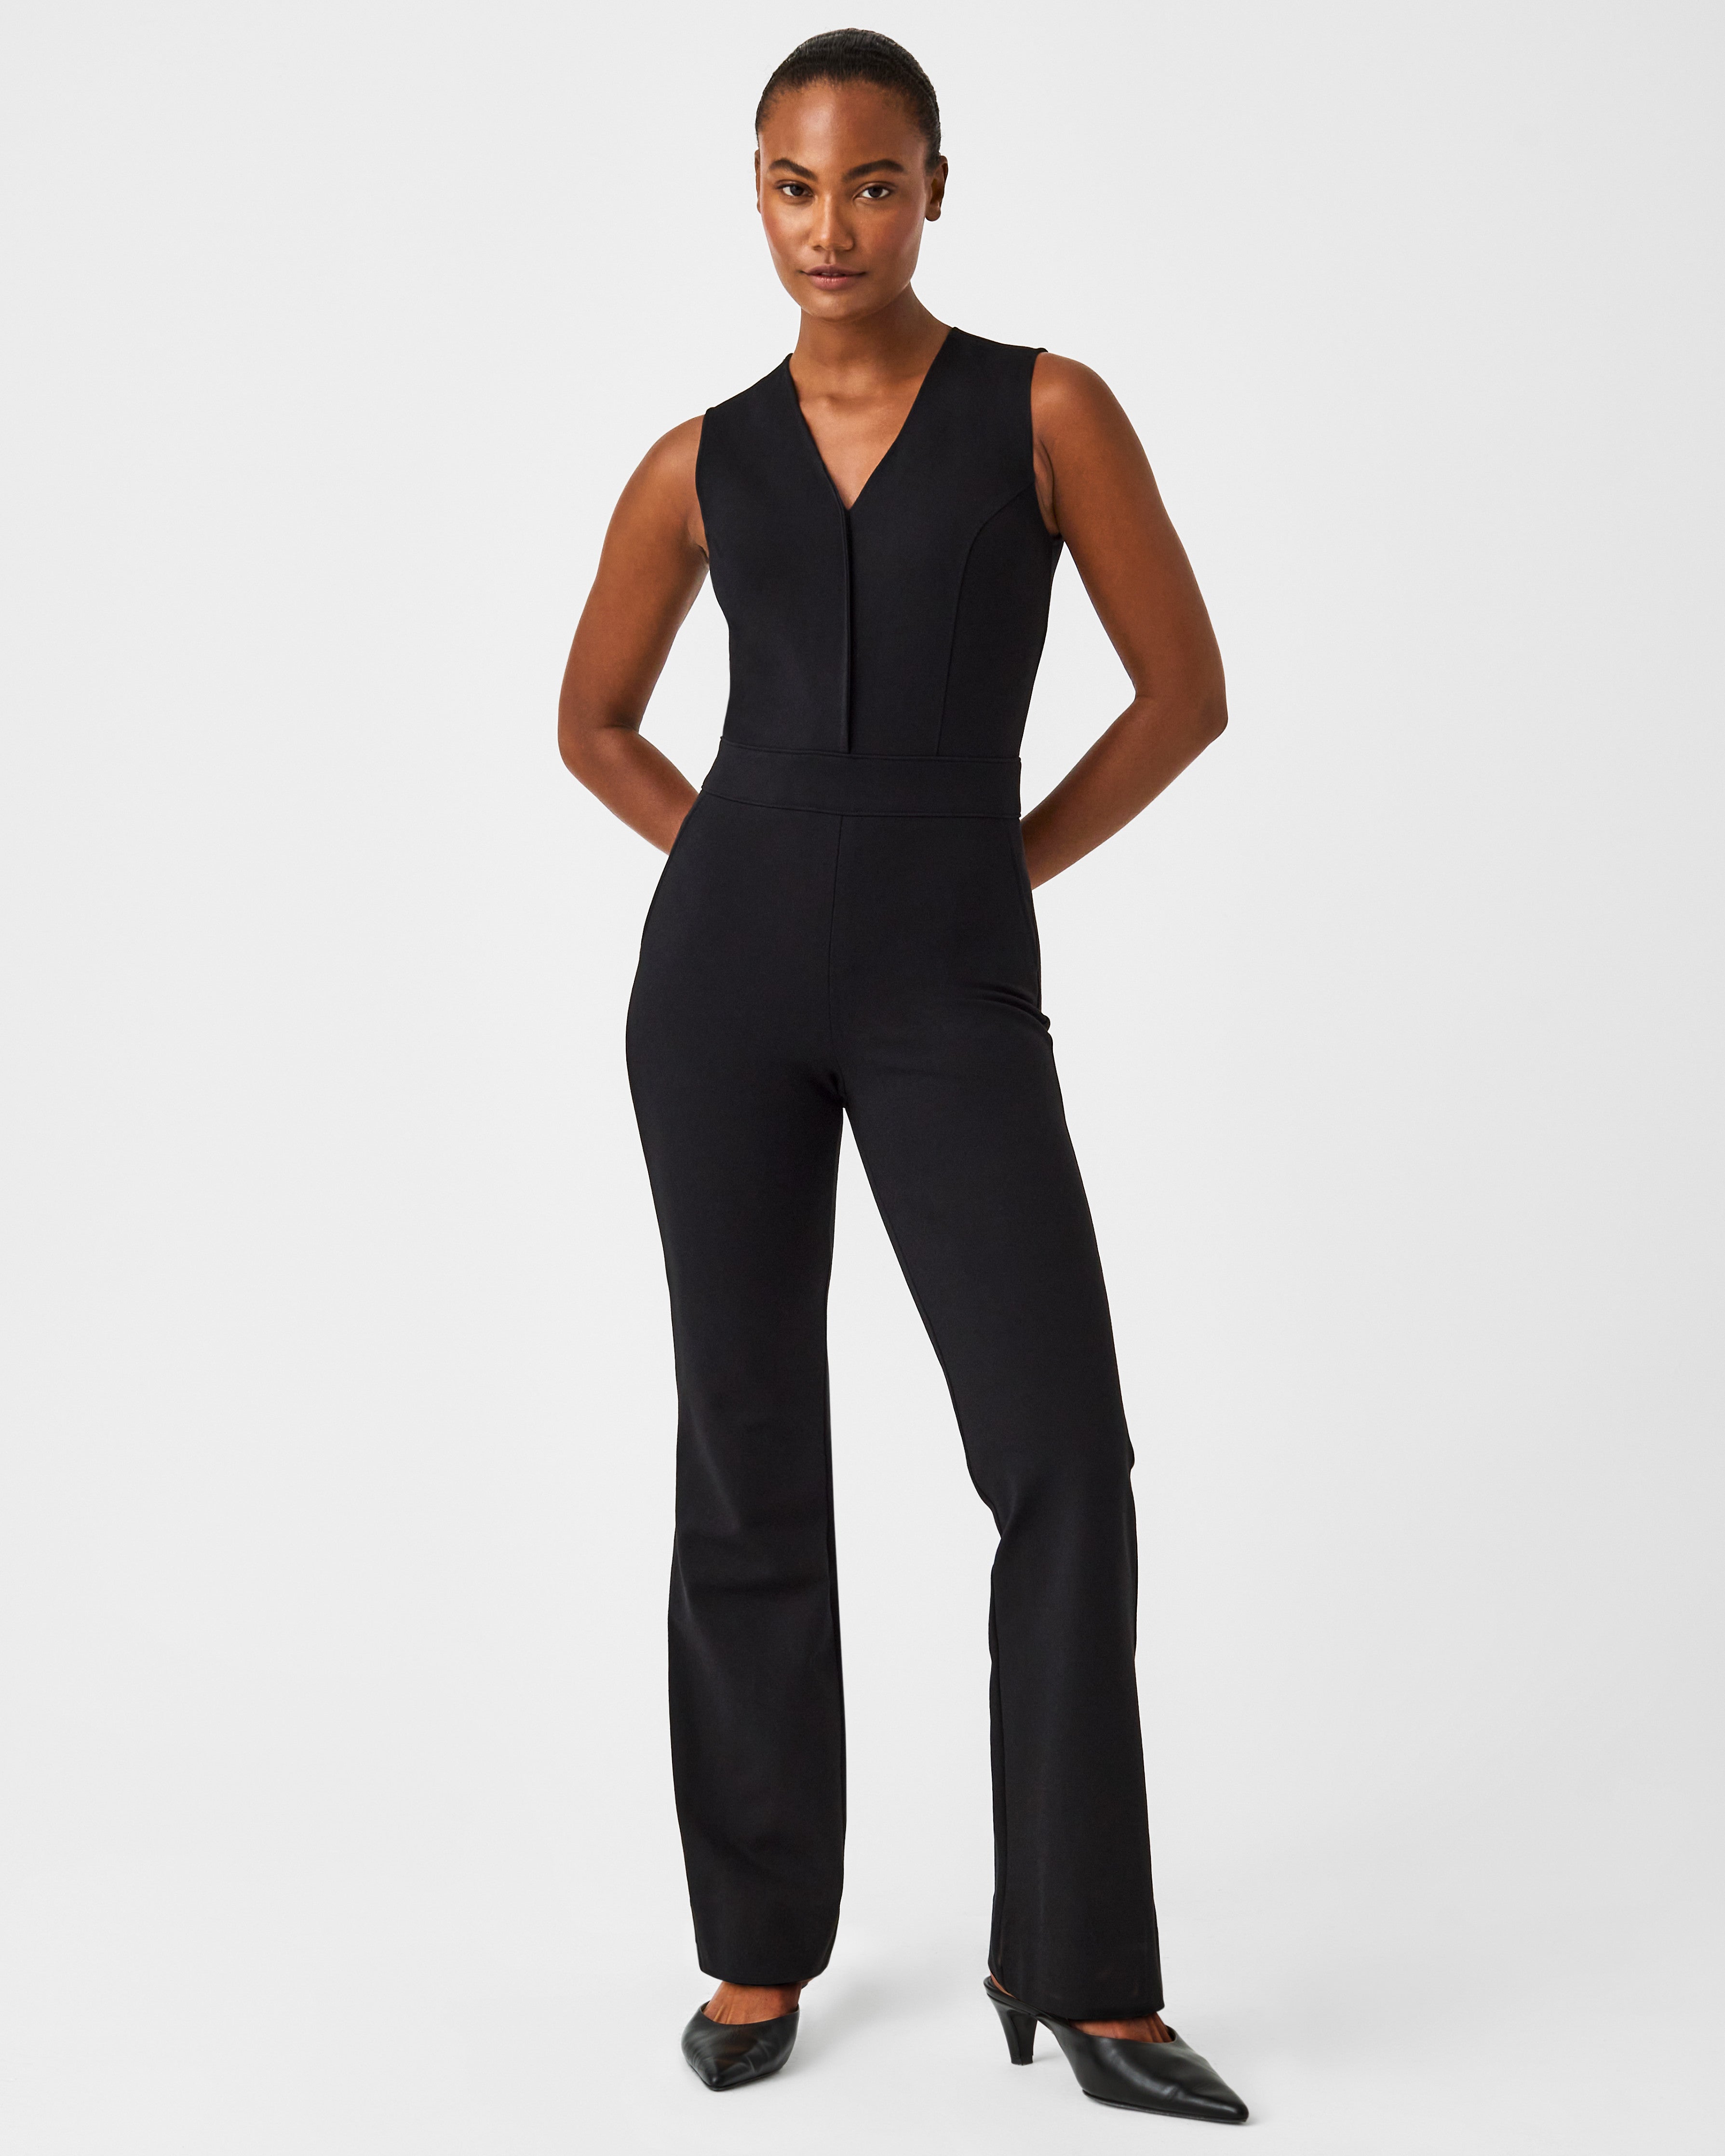 SPANX Air Essentials Jumpsuit-9 - 50 IS NOT OLD - A Fashion And